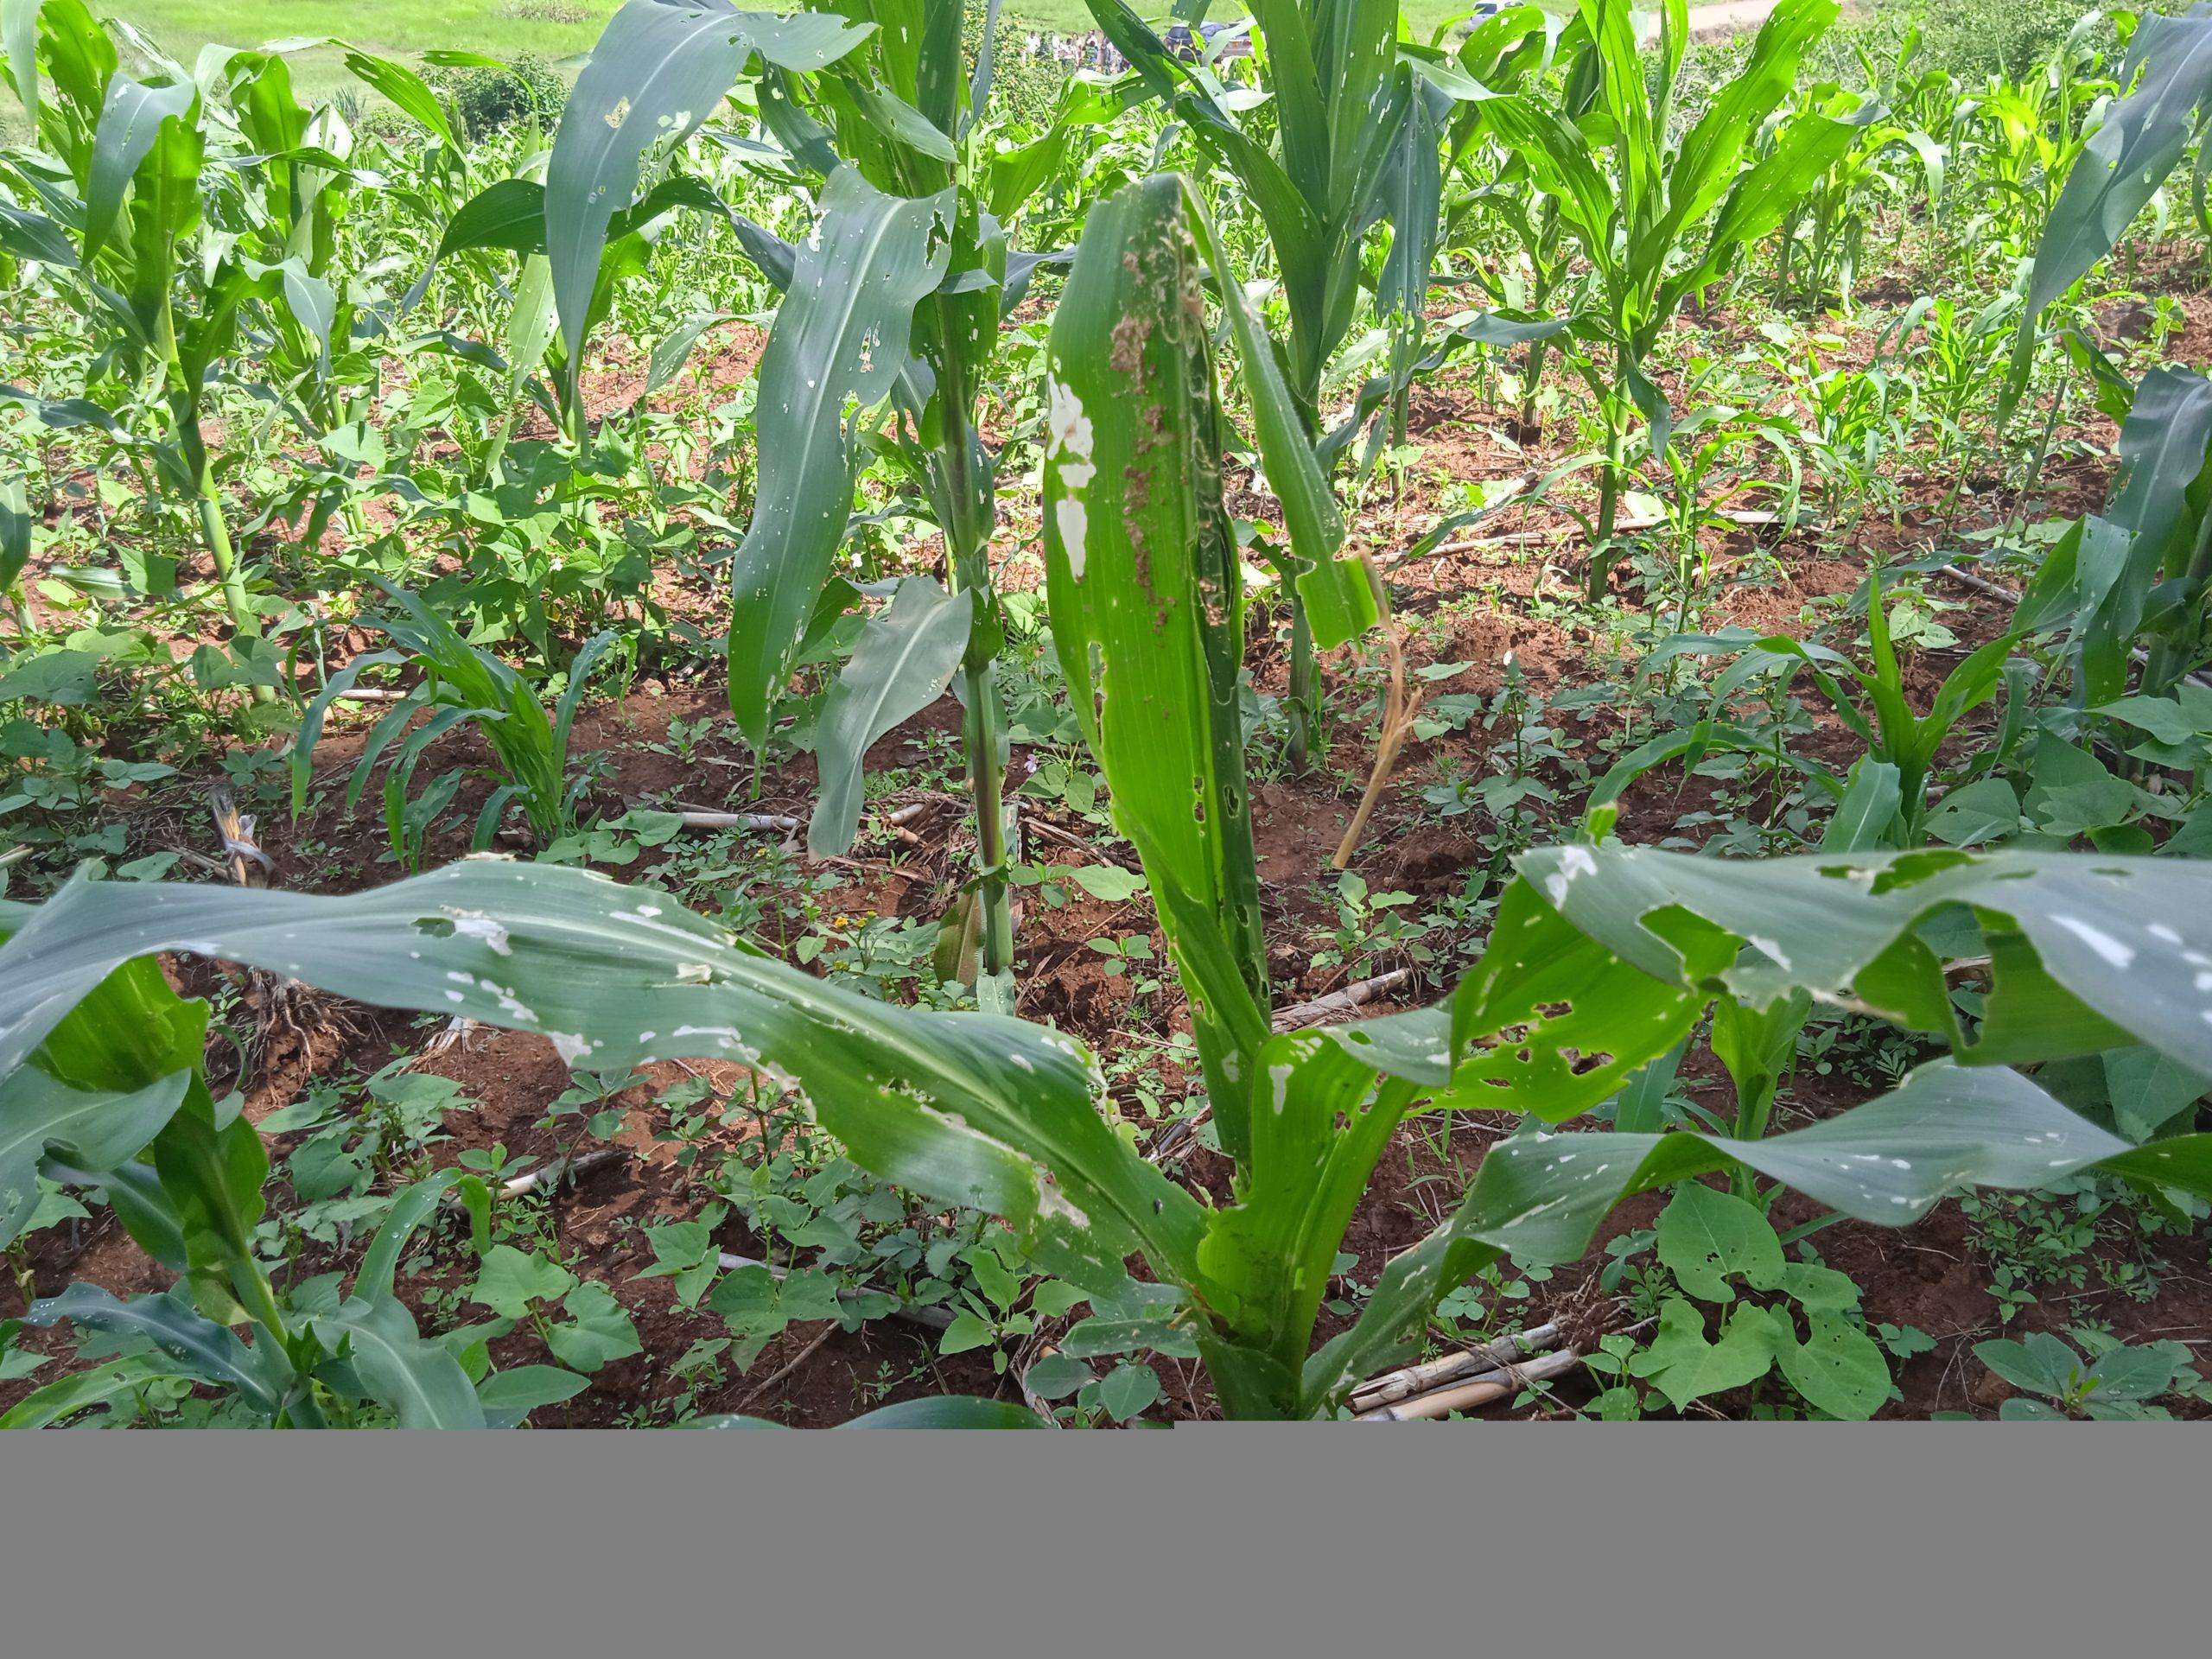 How to identify and control Fall armyworm